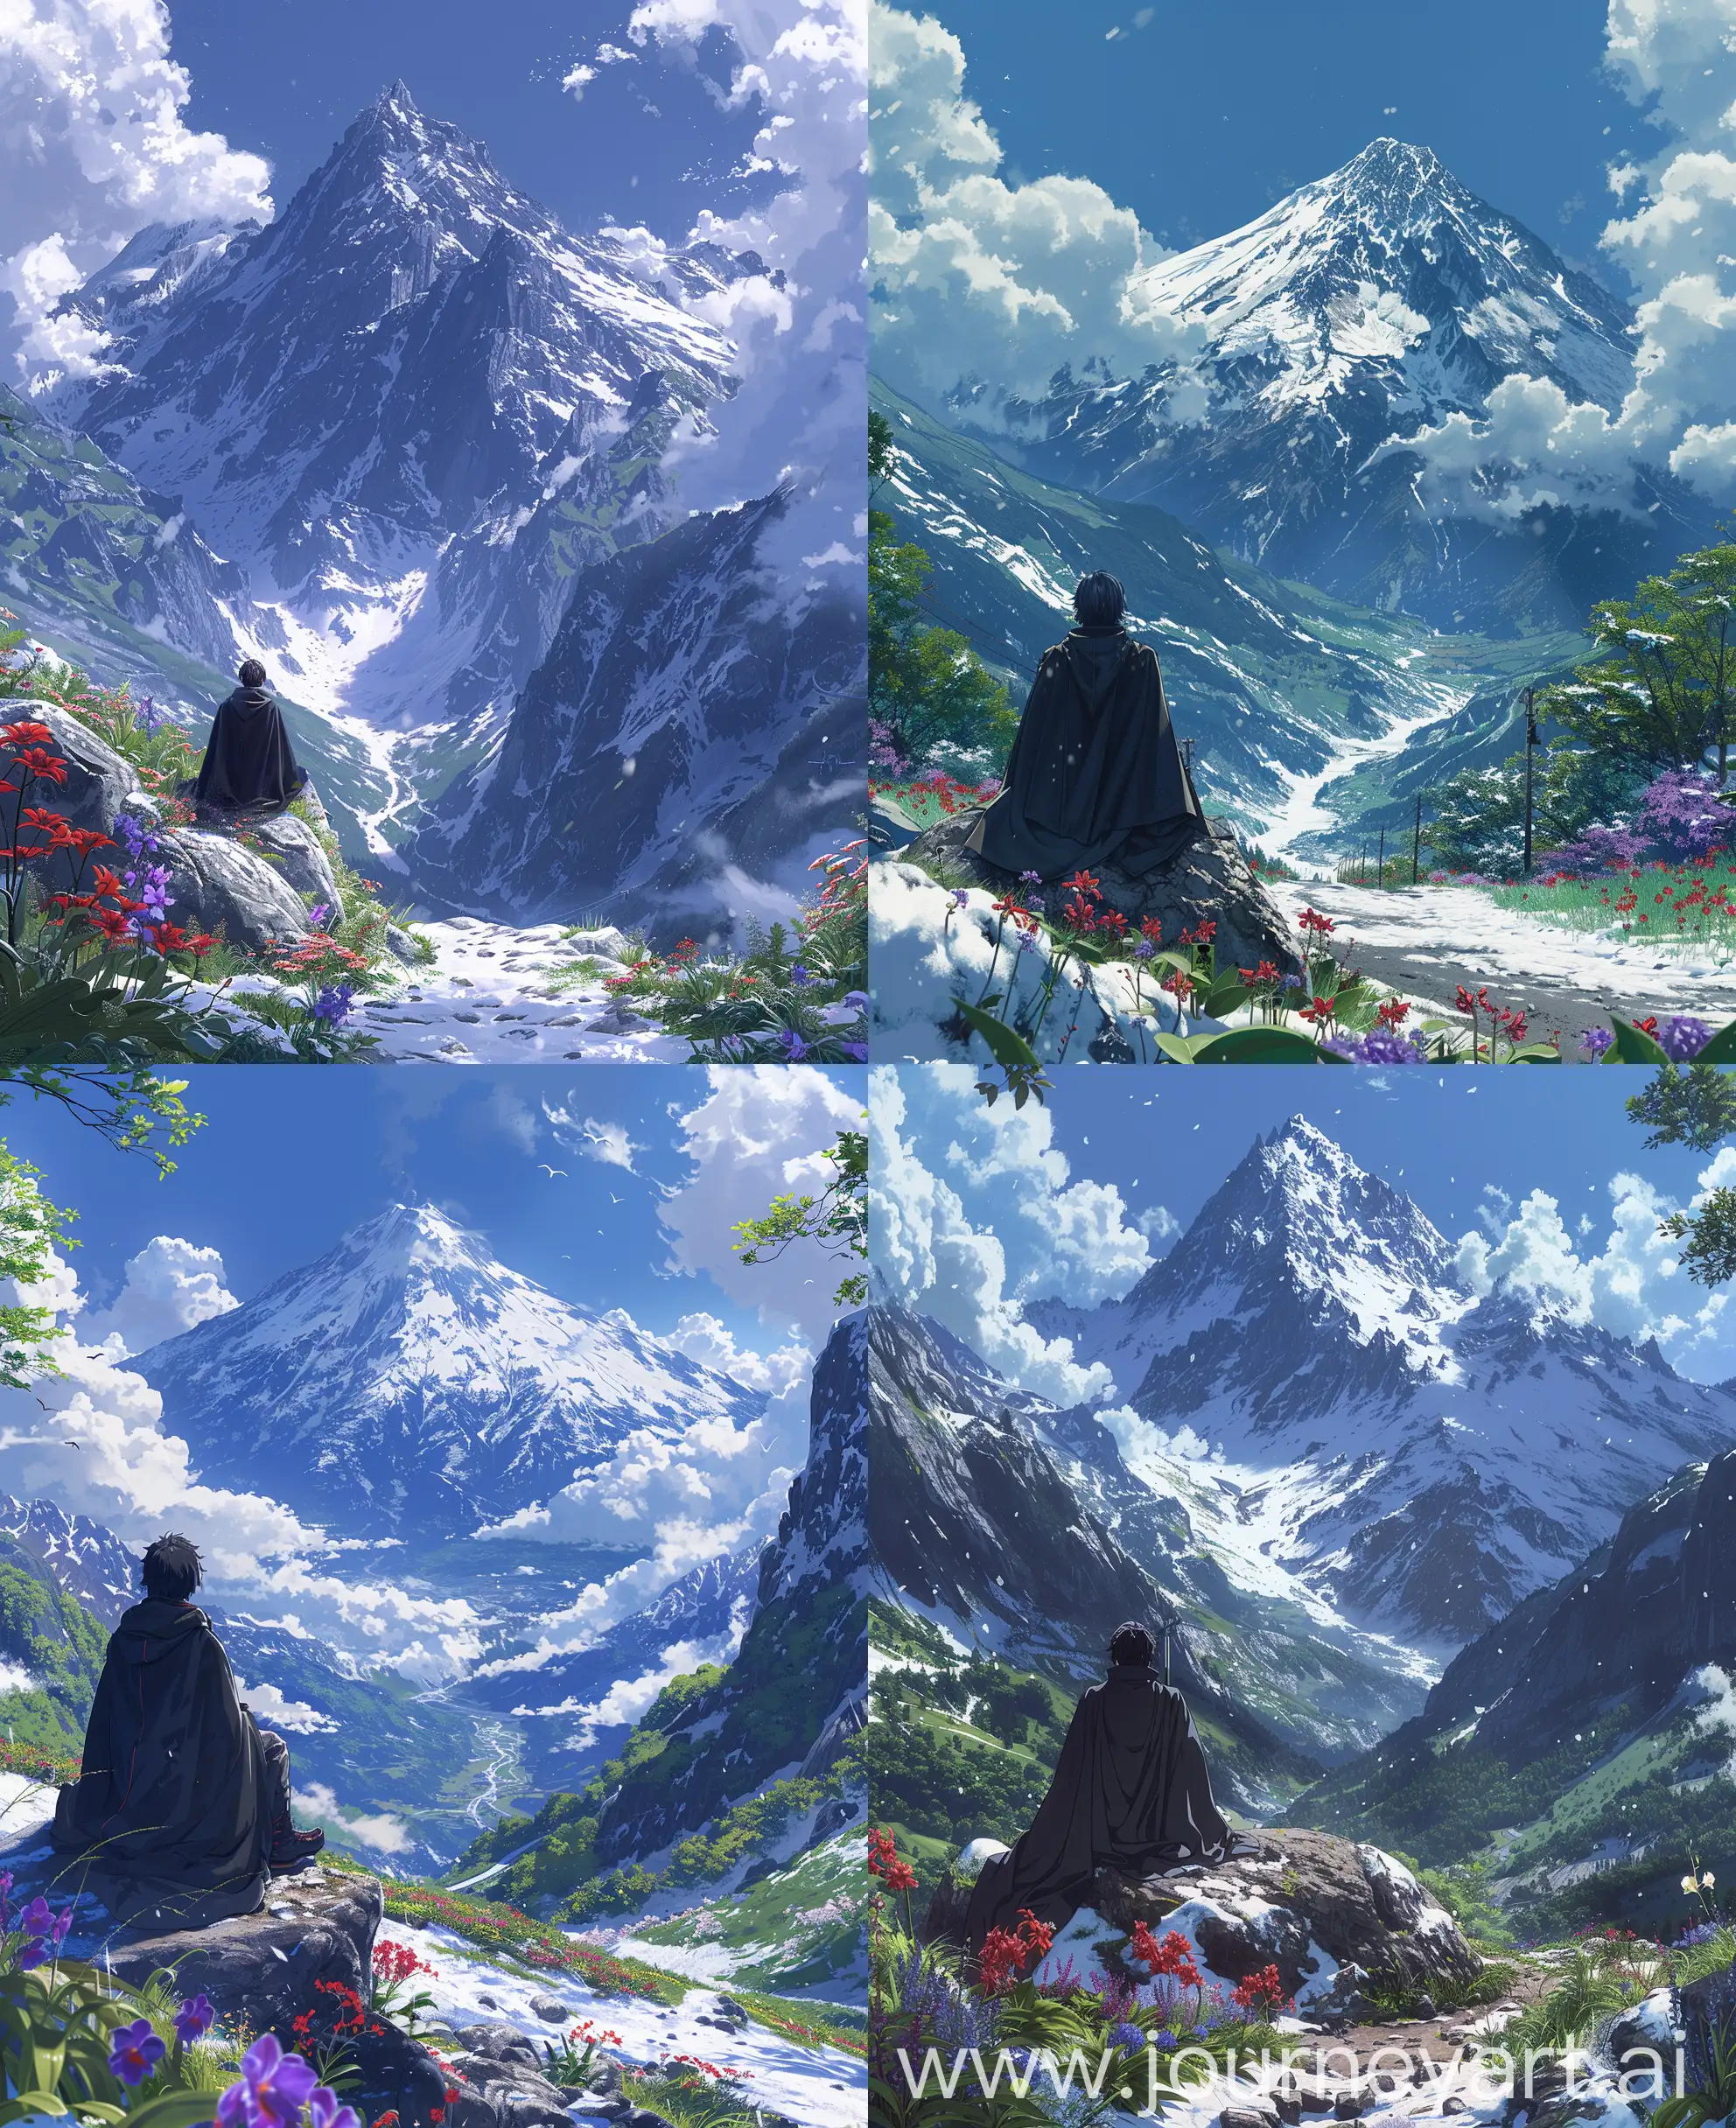 Anime-Illustration-Summer-Mountain-Road-with-Snowy-Peaks-and-Orchids